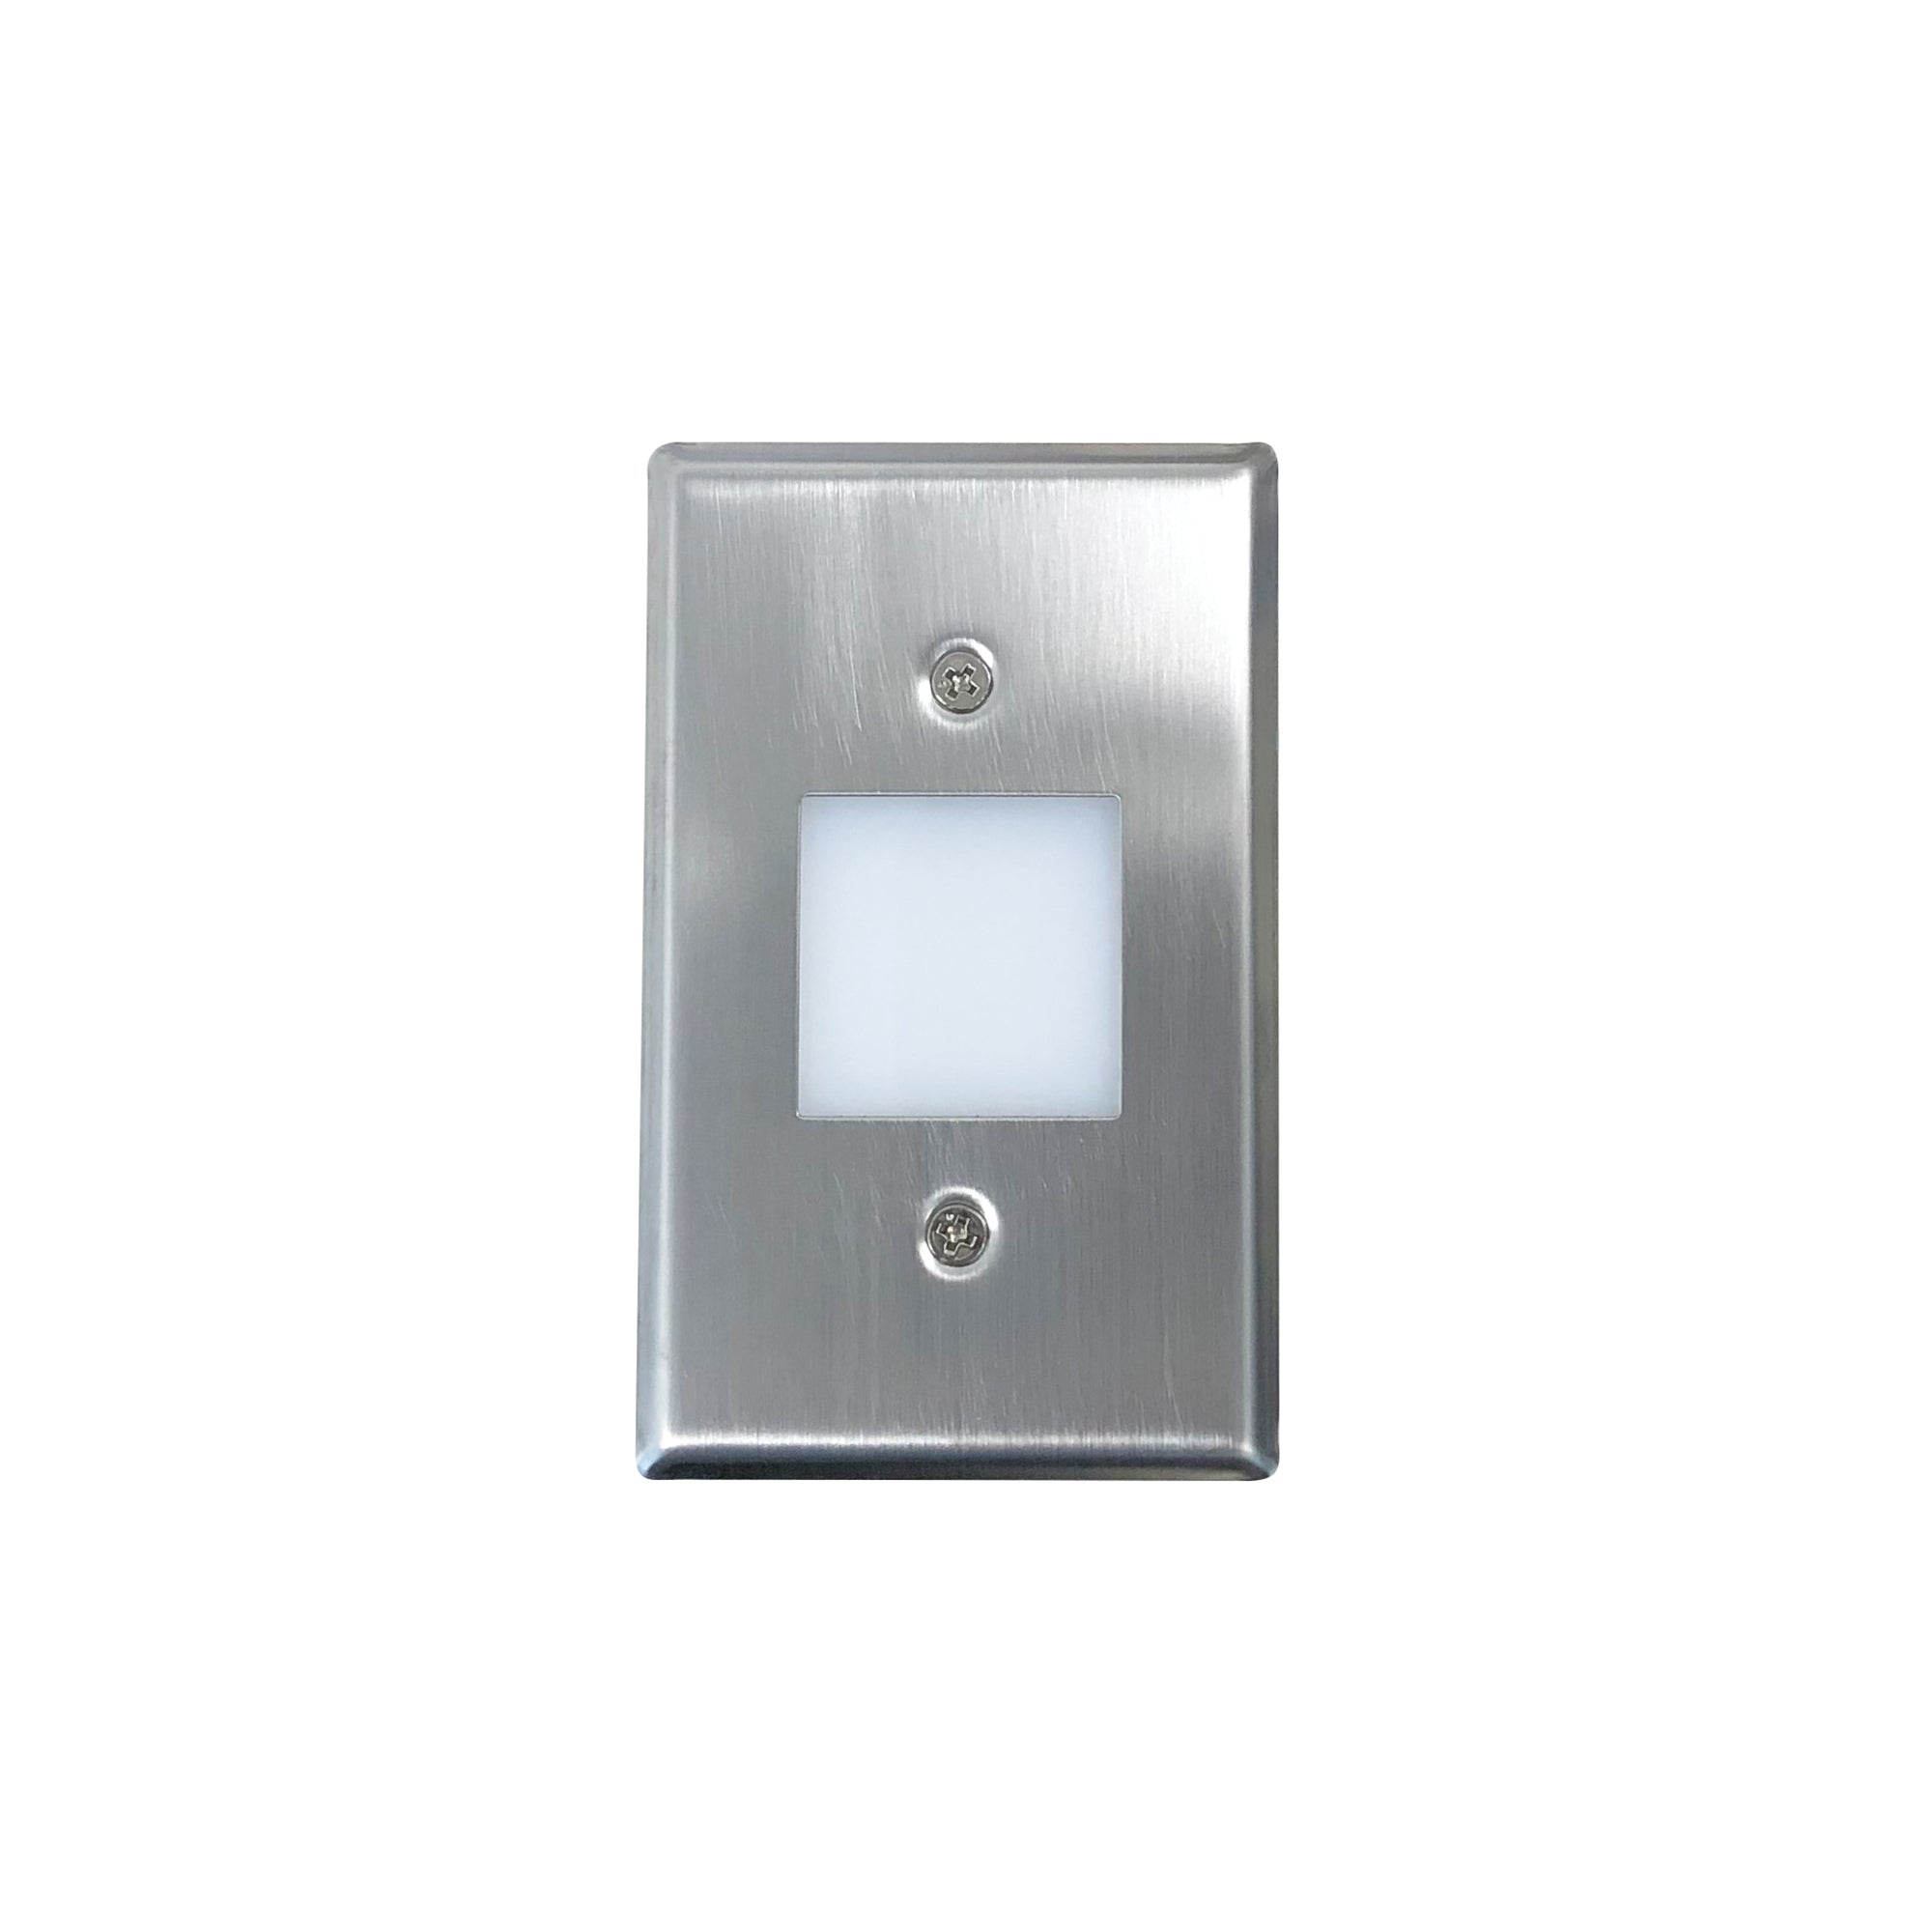 Nora Lighting NSW-6629BN - Step Light - Mini LED Step Light w/ Frosted Glass Lens Face Plate, 1W, 90+ CRI, 2700K, Brushed Nickel, 120V Non-Dimming